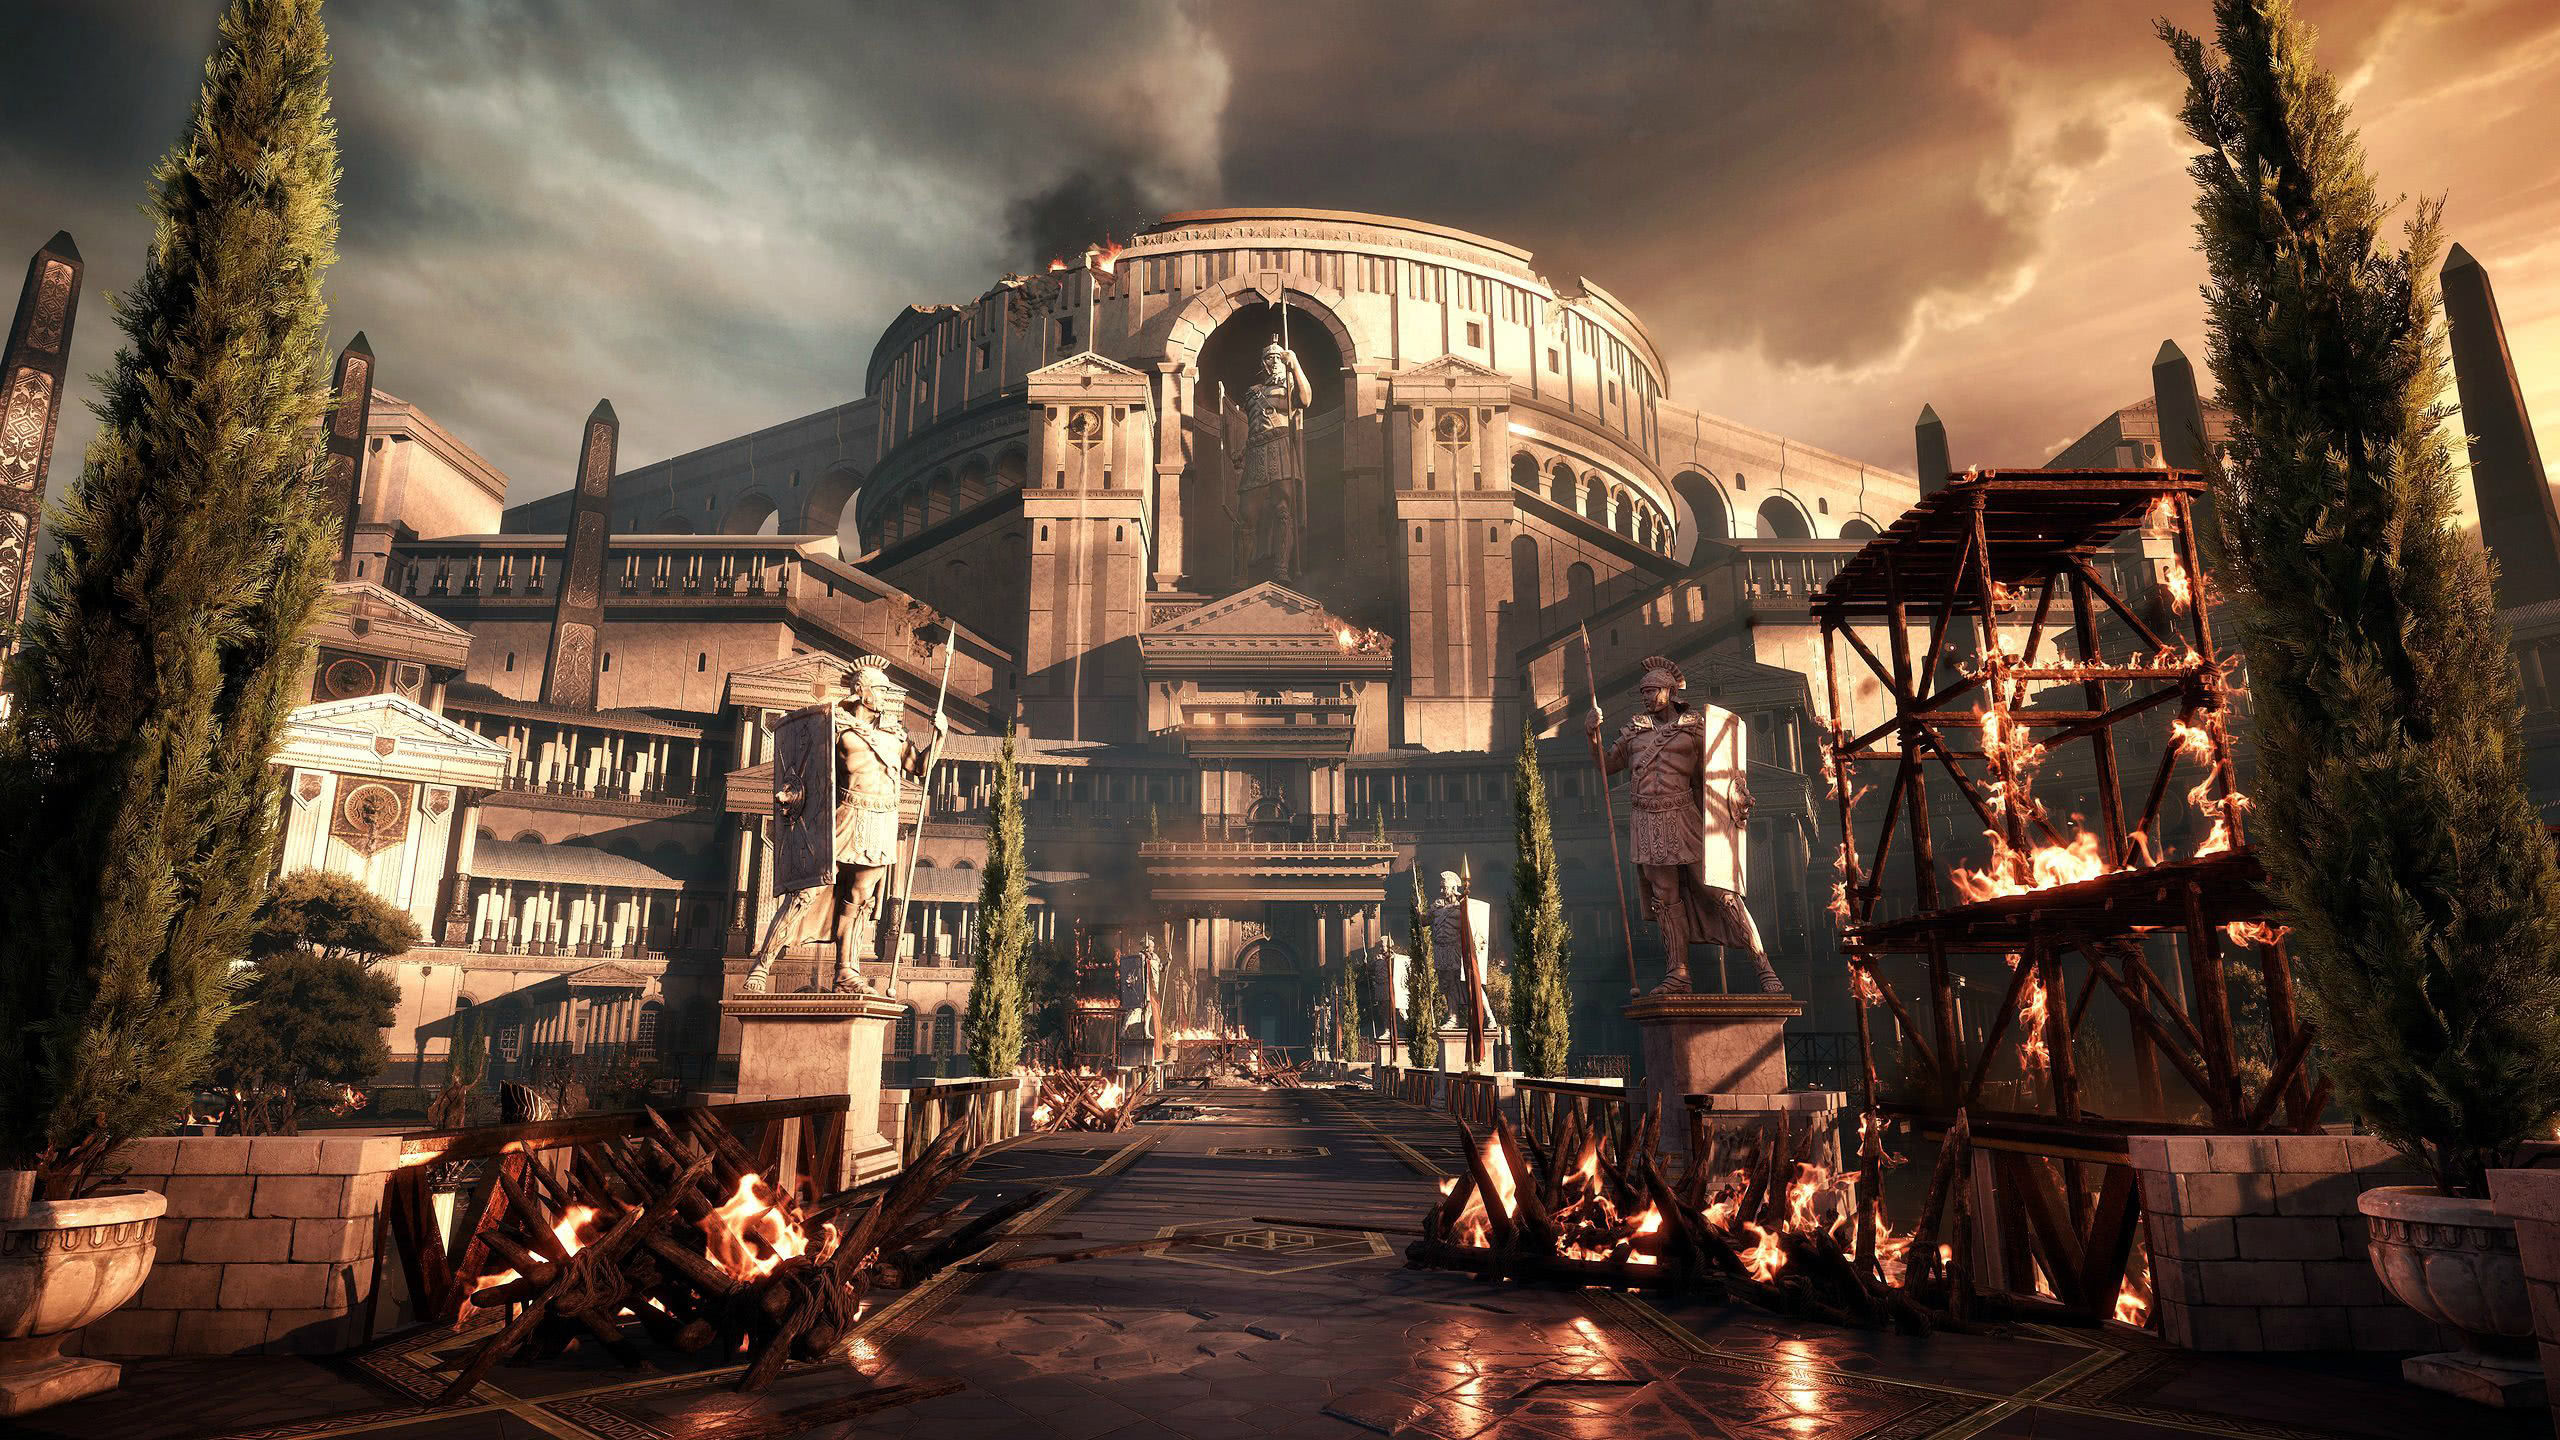 Ryse: Son Of Rome Wallpapers